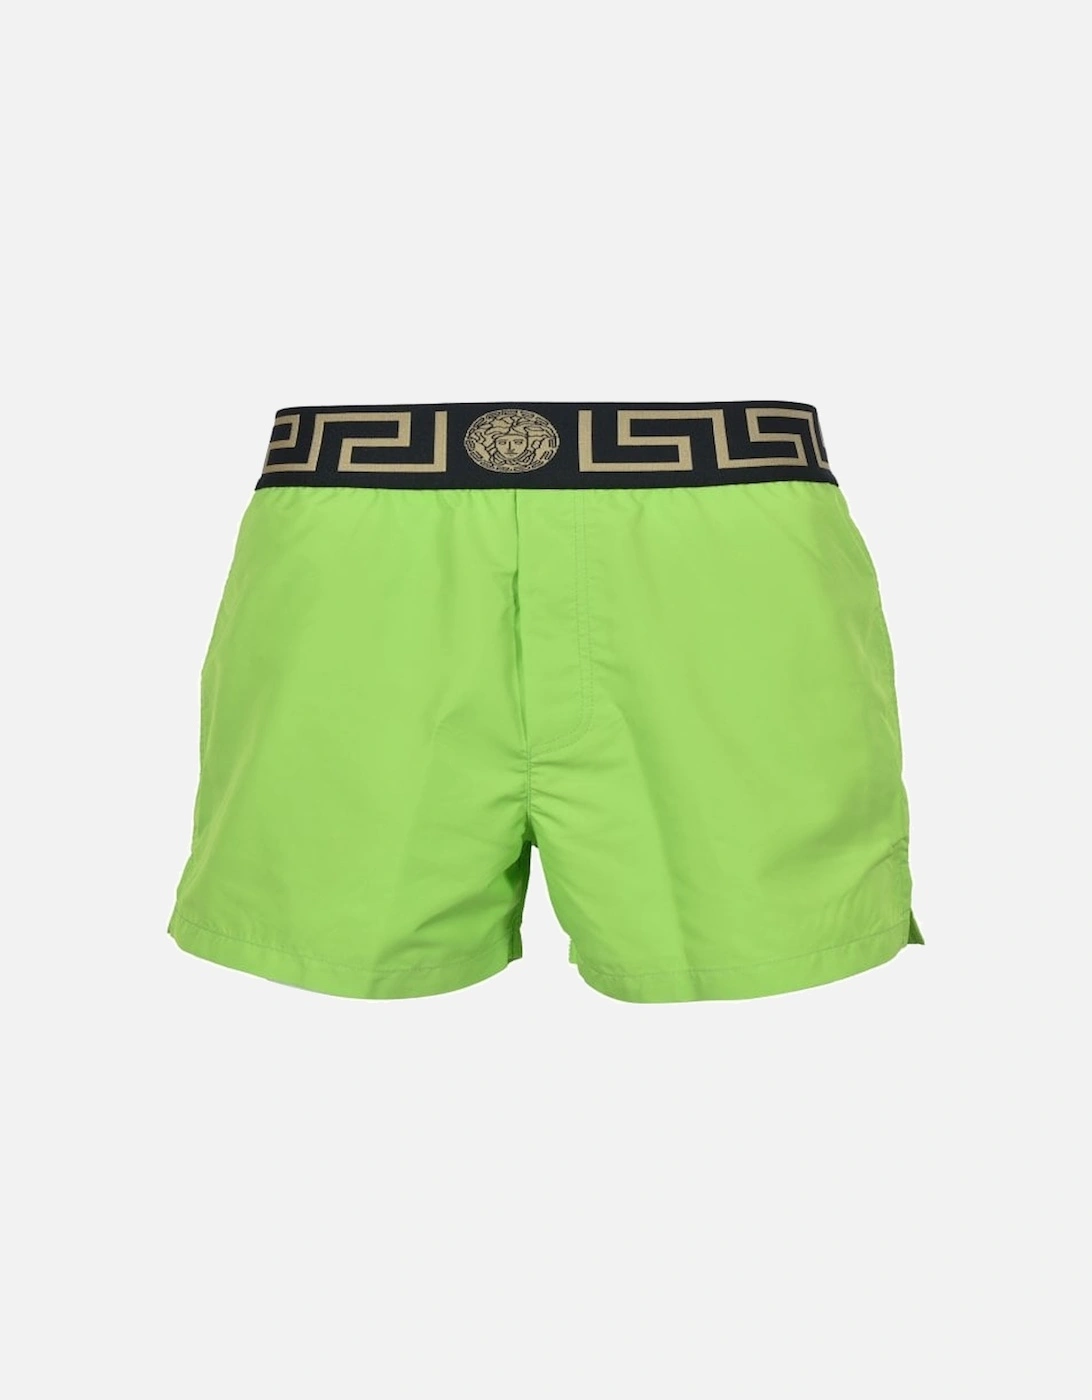 Iconic Luxe Swim Shorts, Lime/black/gold, 6 of 5